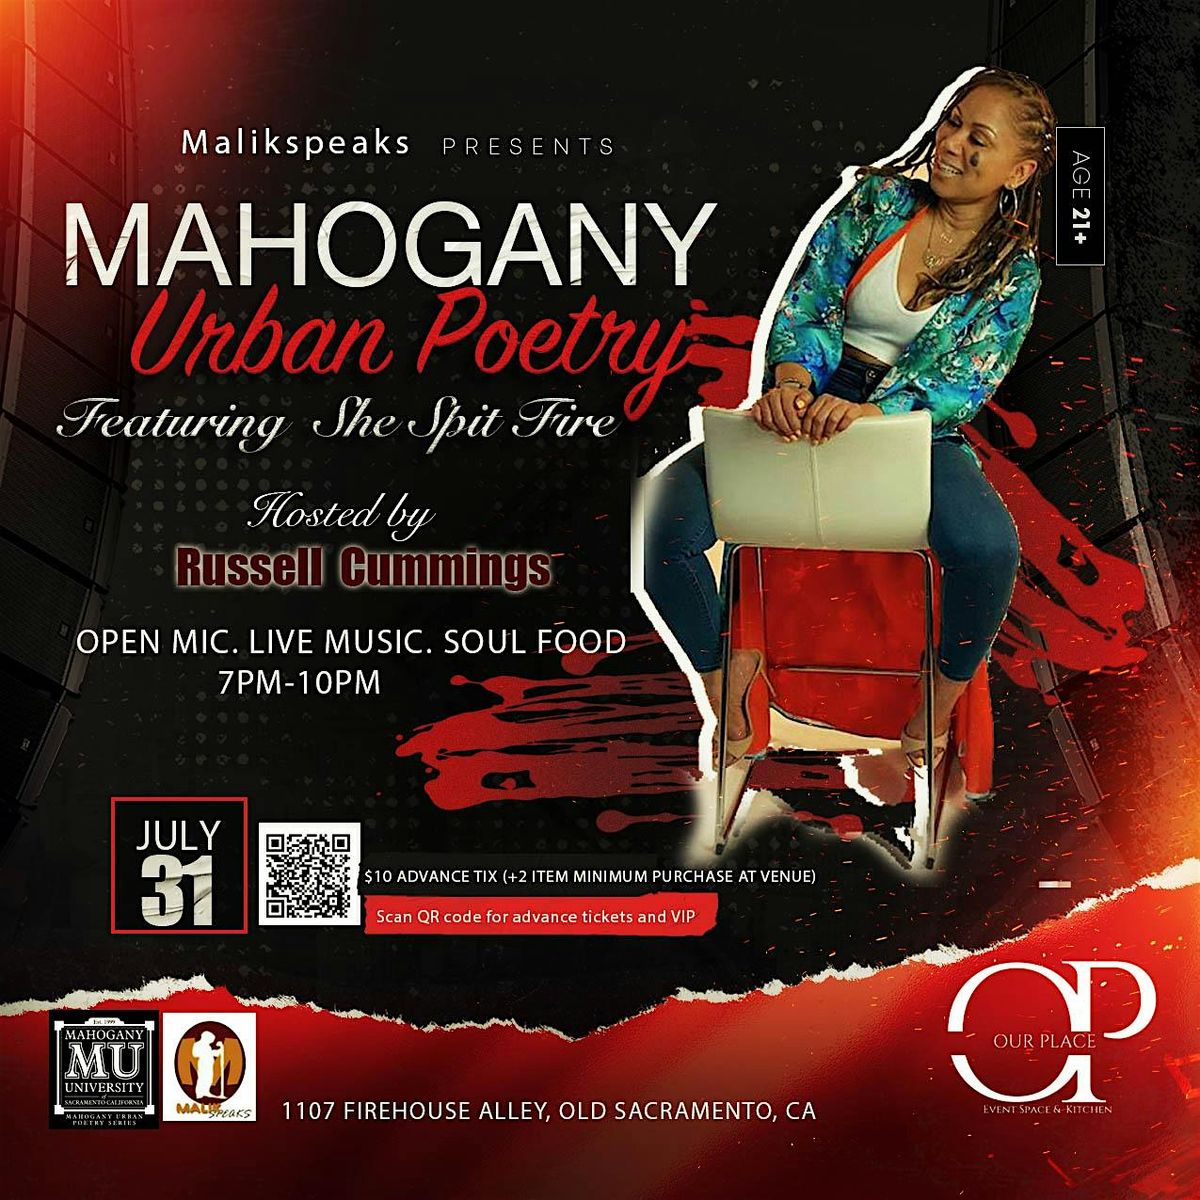 Mahogany Urban Poetry feat. M'ster Lewis and She Spit Fire